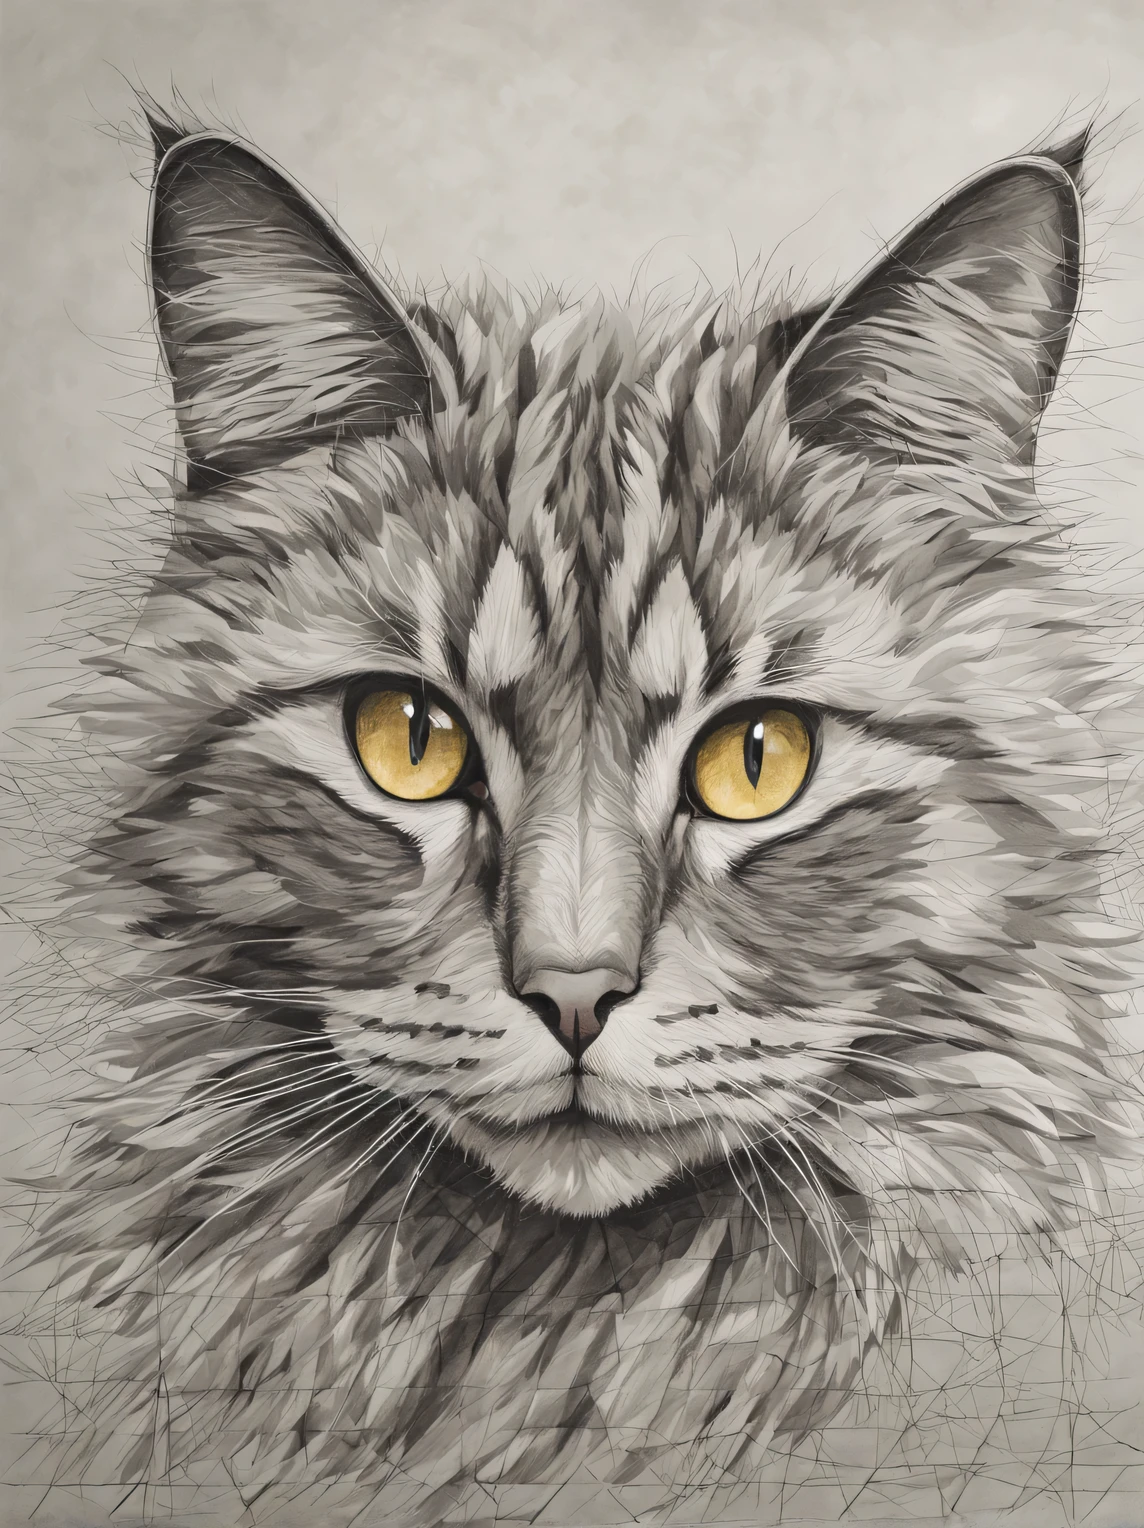 The Art of Drawing with Cells, the pattern is formed by a thin cell, portrait of a fluffy cat made in thin checkered patterns on gray paper